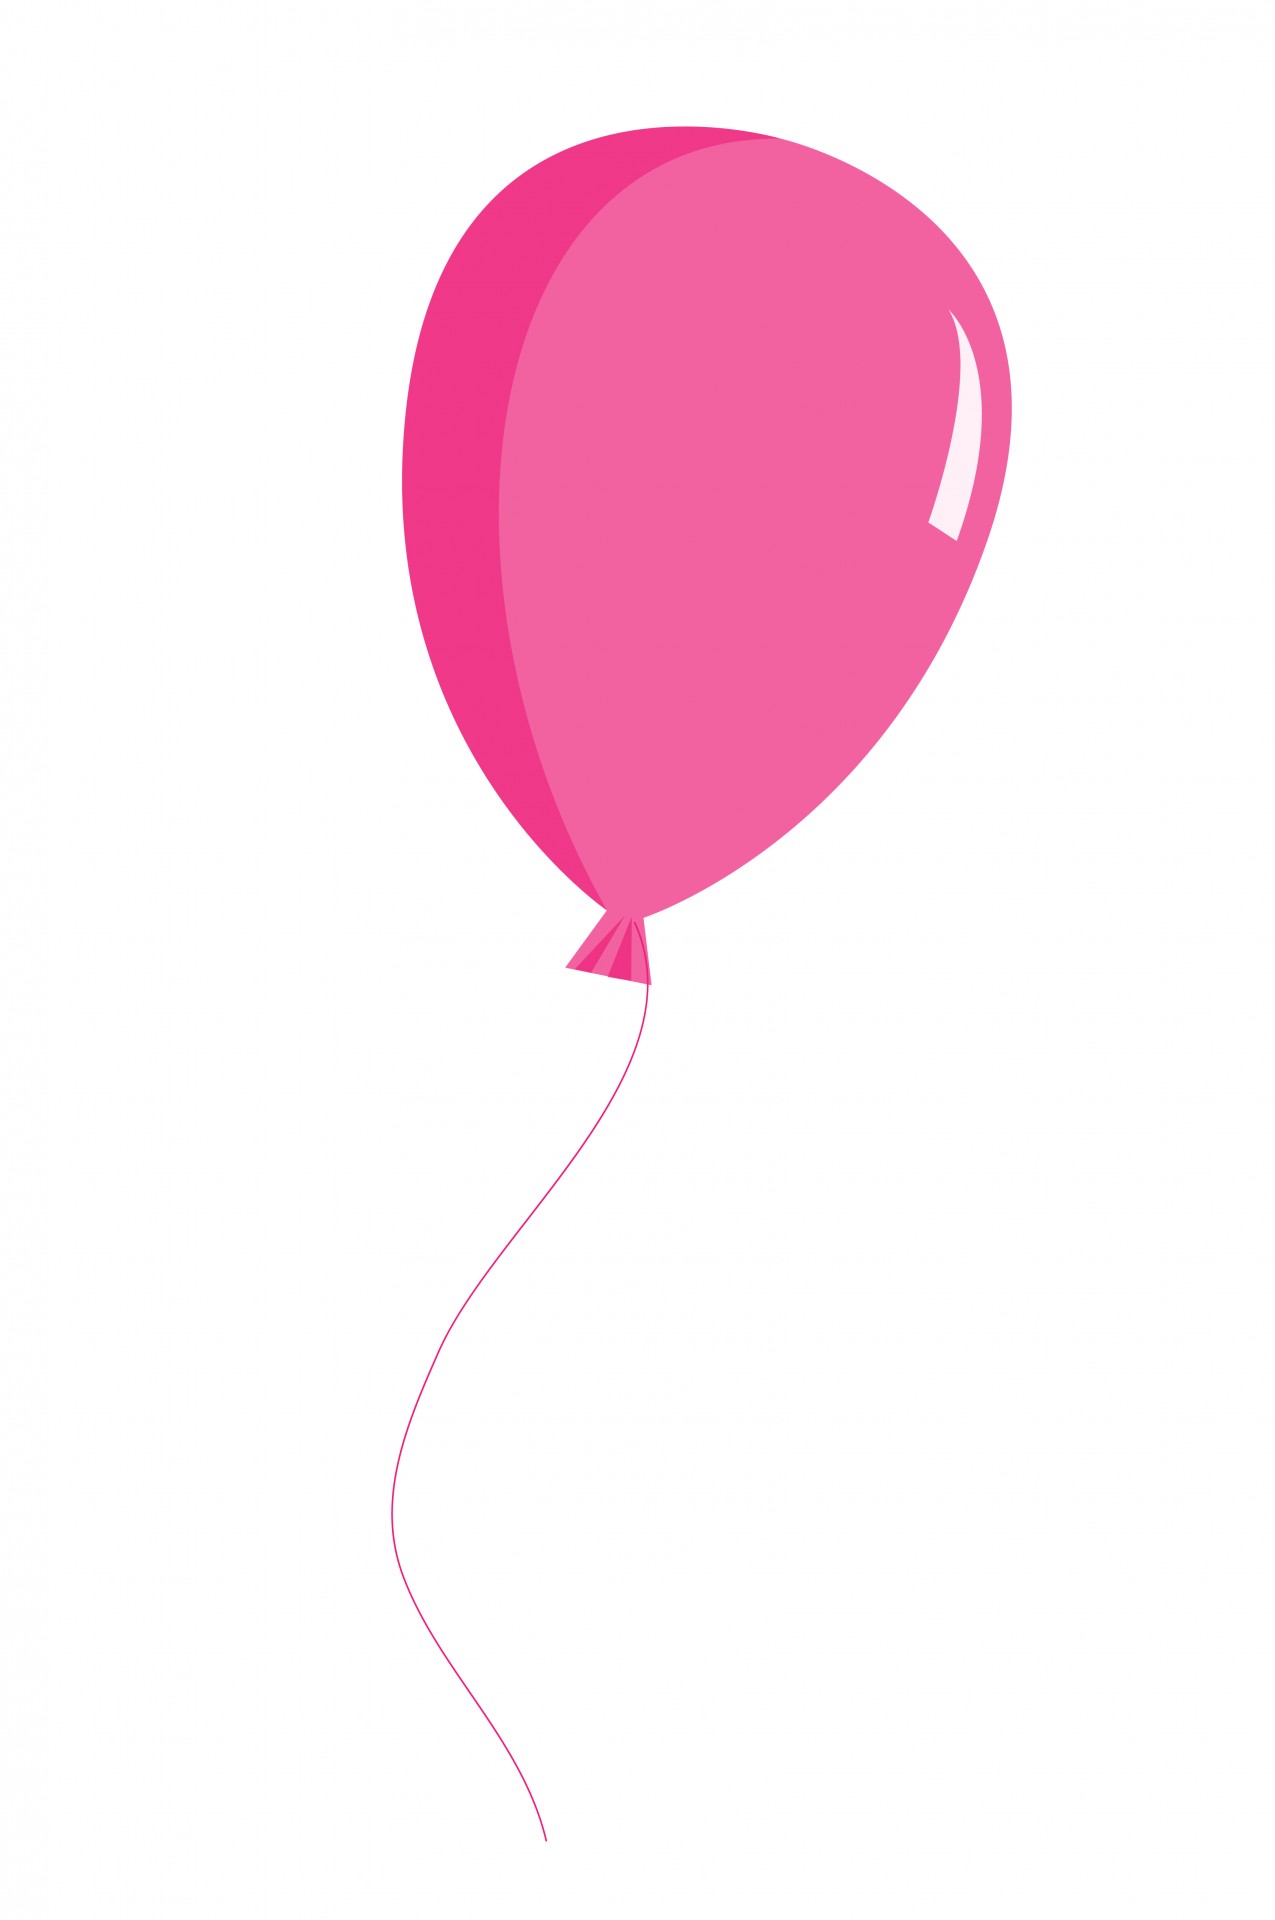 free balloon clip art images - photo #41